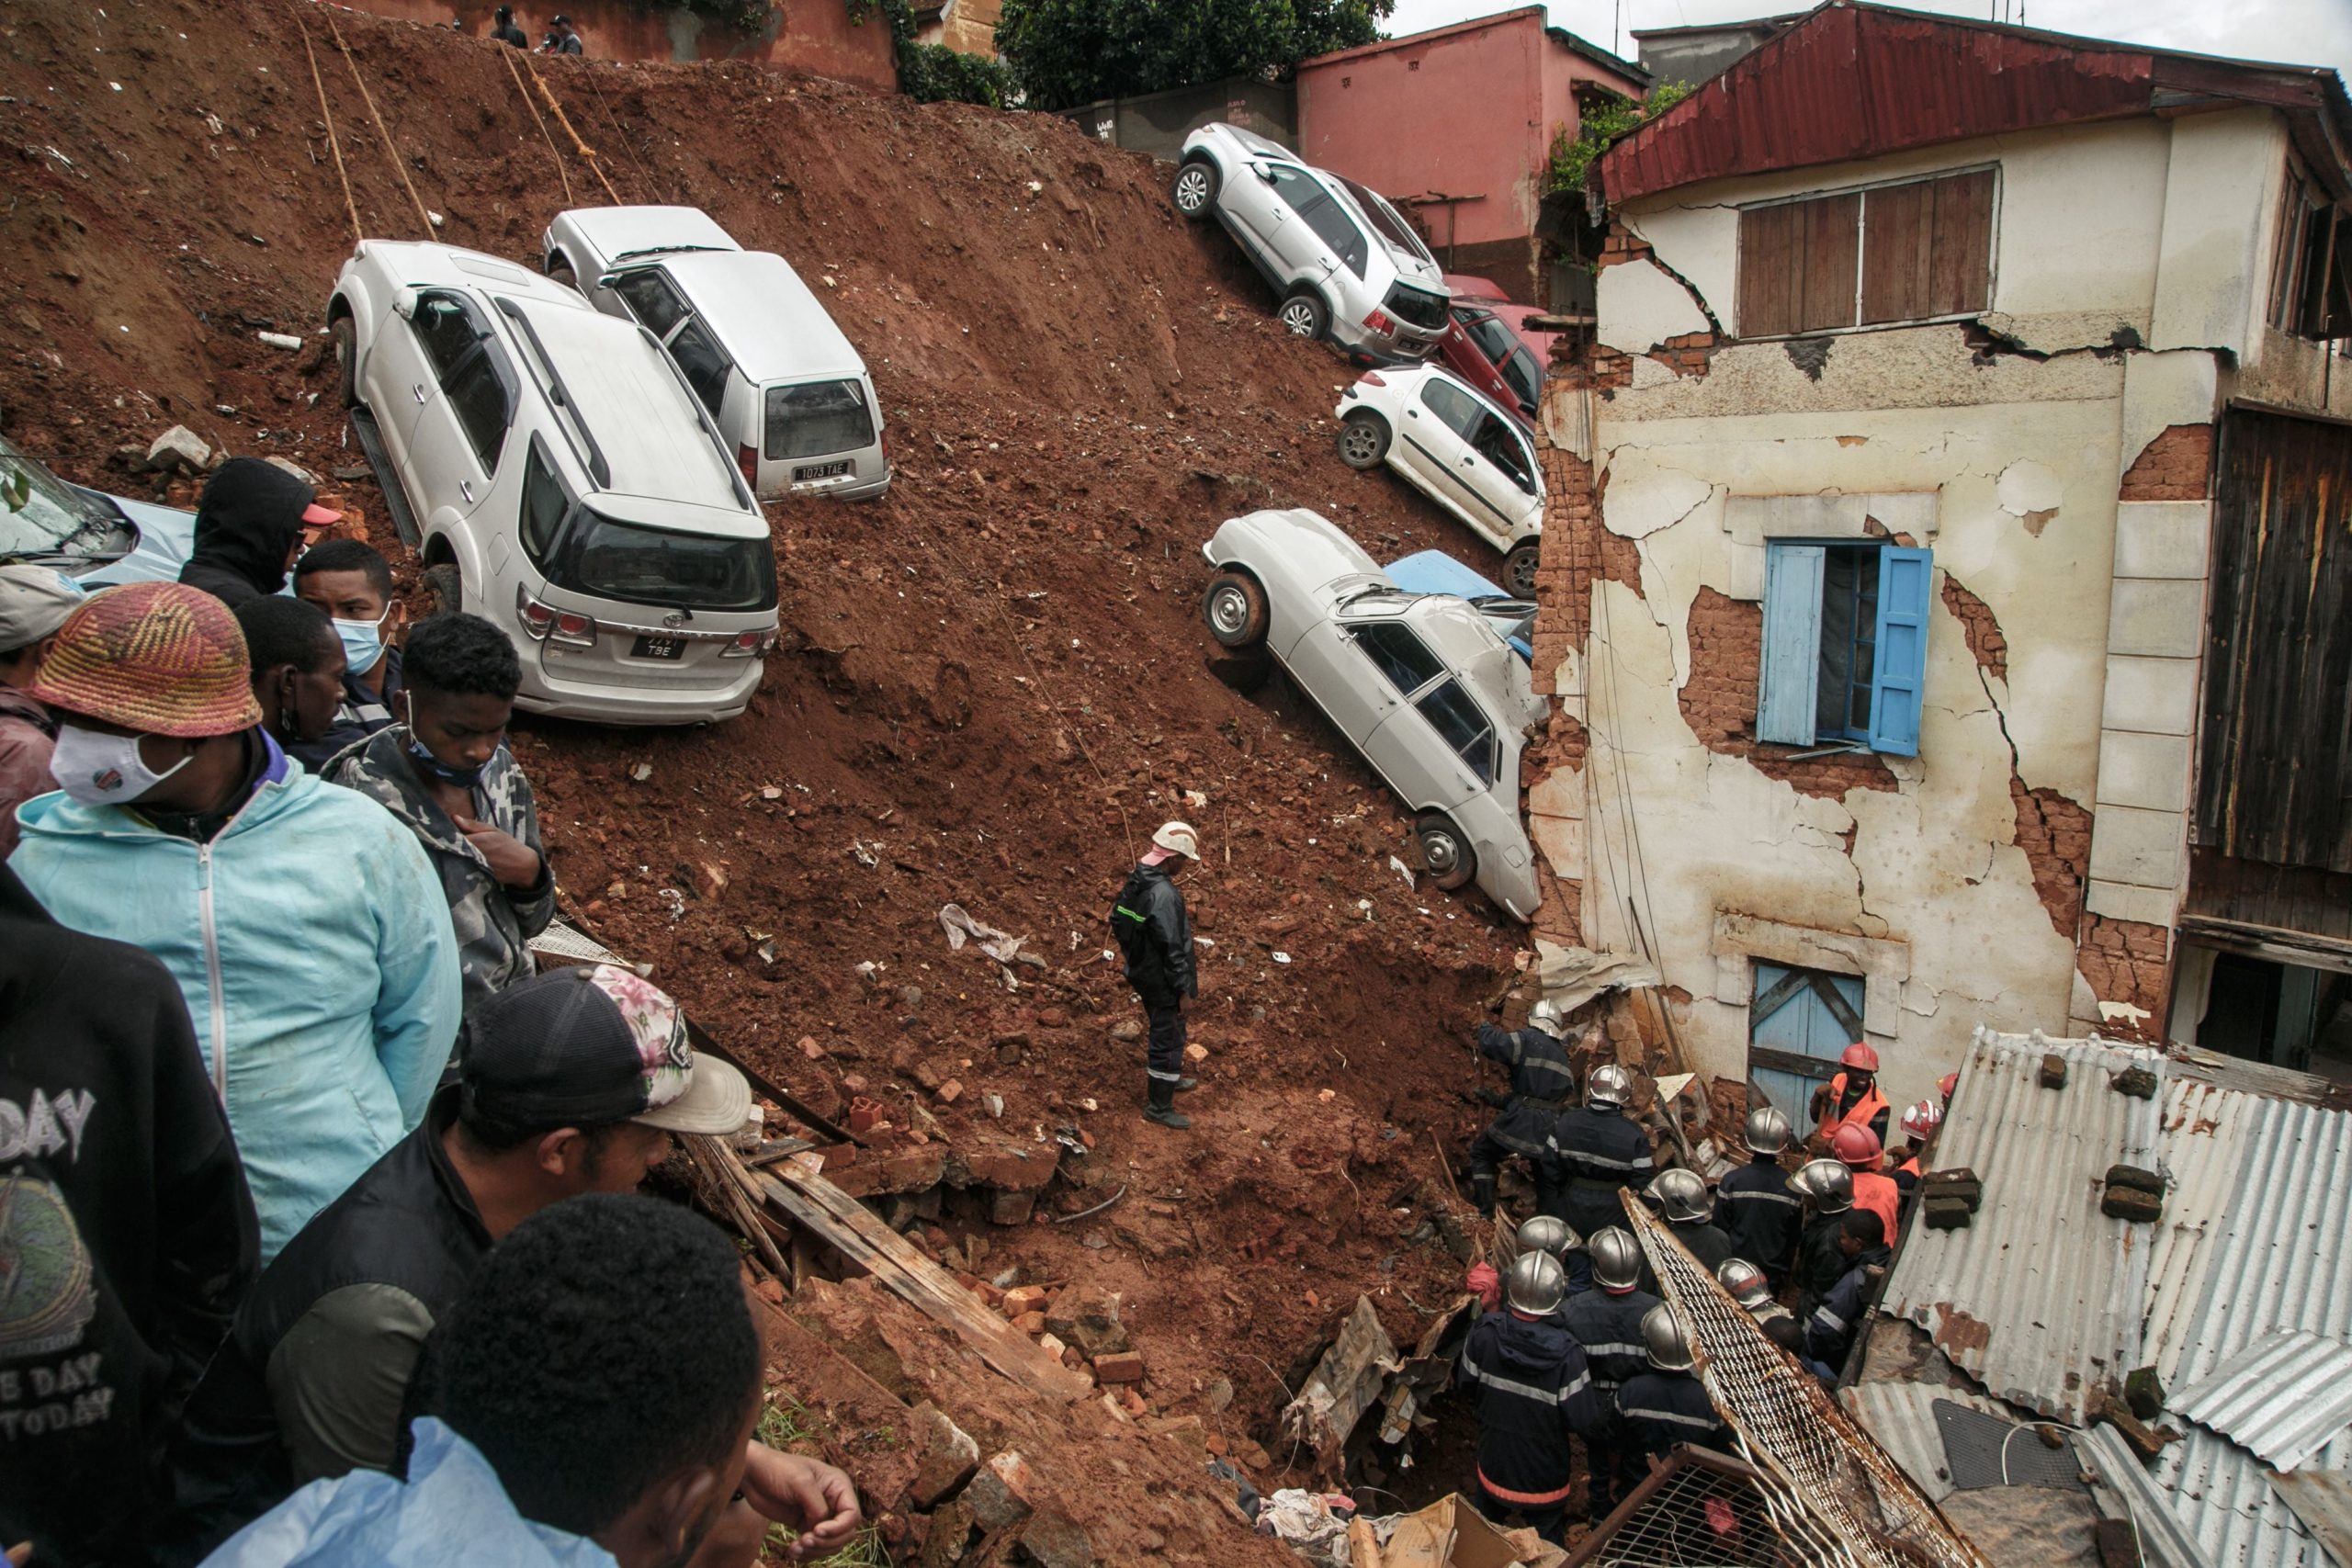 Firefighters search through rubble after a car park housing several private cars collapsed on houses following the heavy rains of the last few days in the Ankadifotsy neighbourhood of Antananarivo on January 24. (Photo: RIJASOLO/AFP, Getty Images)